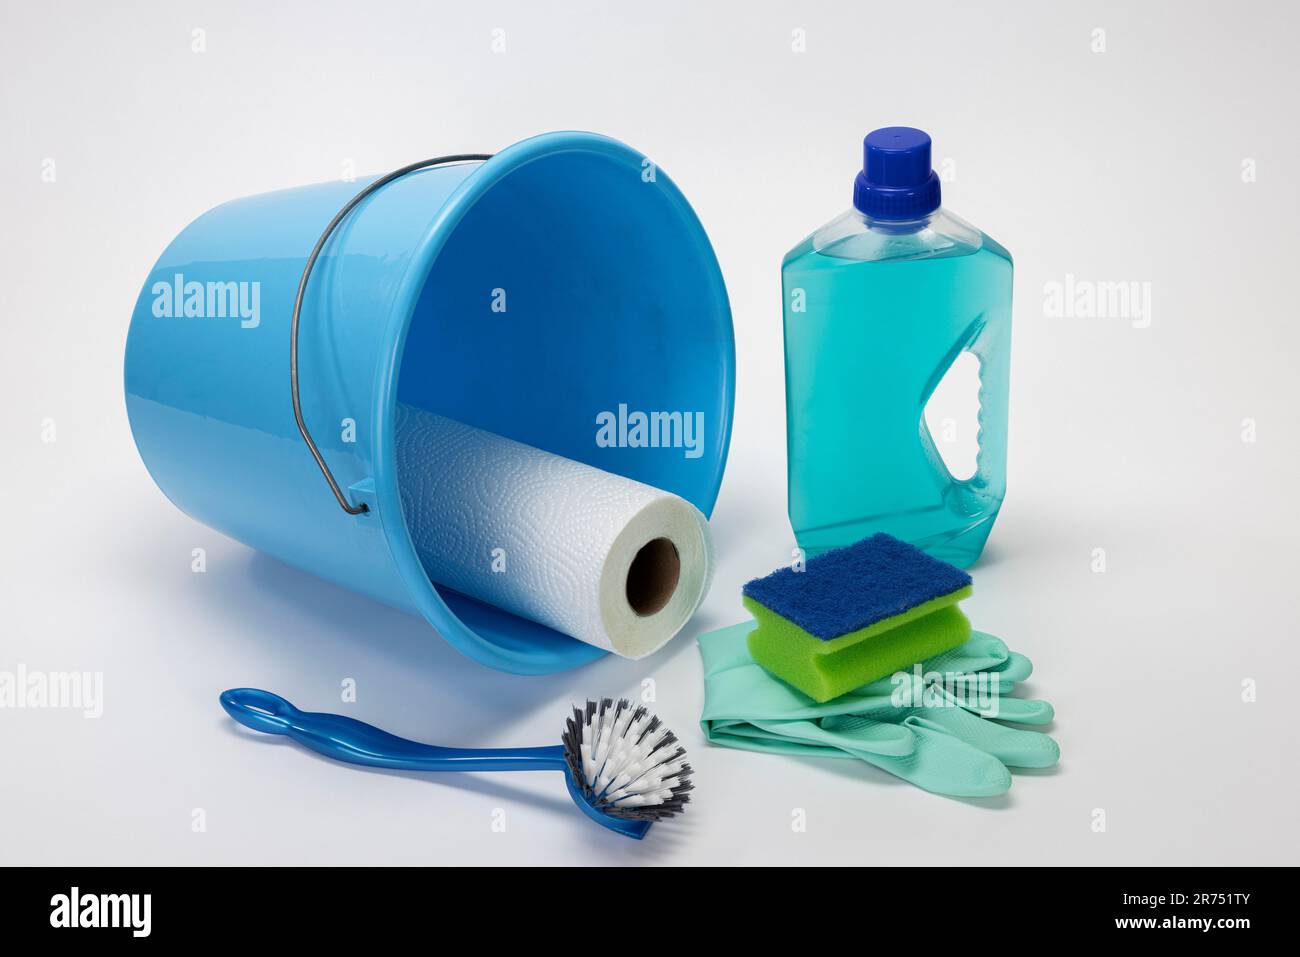 Blue cleaning bucket, brush, cleaning sponge, cleaning gloves, kitchen roll, all-purpose cleaner, white background, Stock Photo